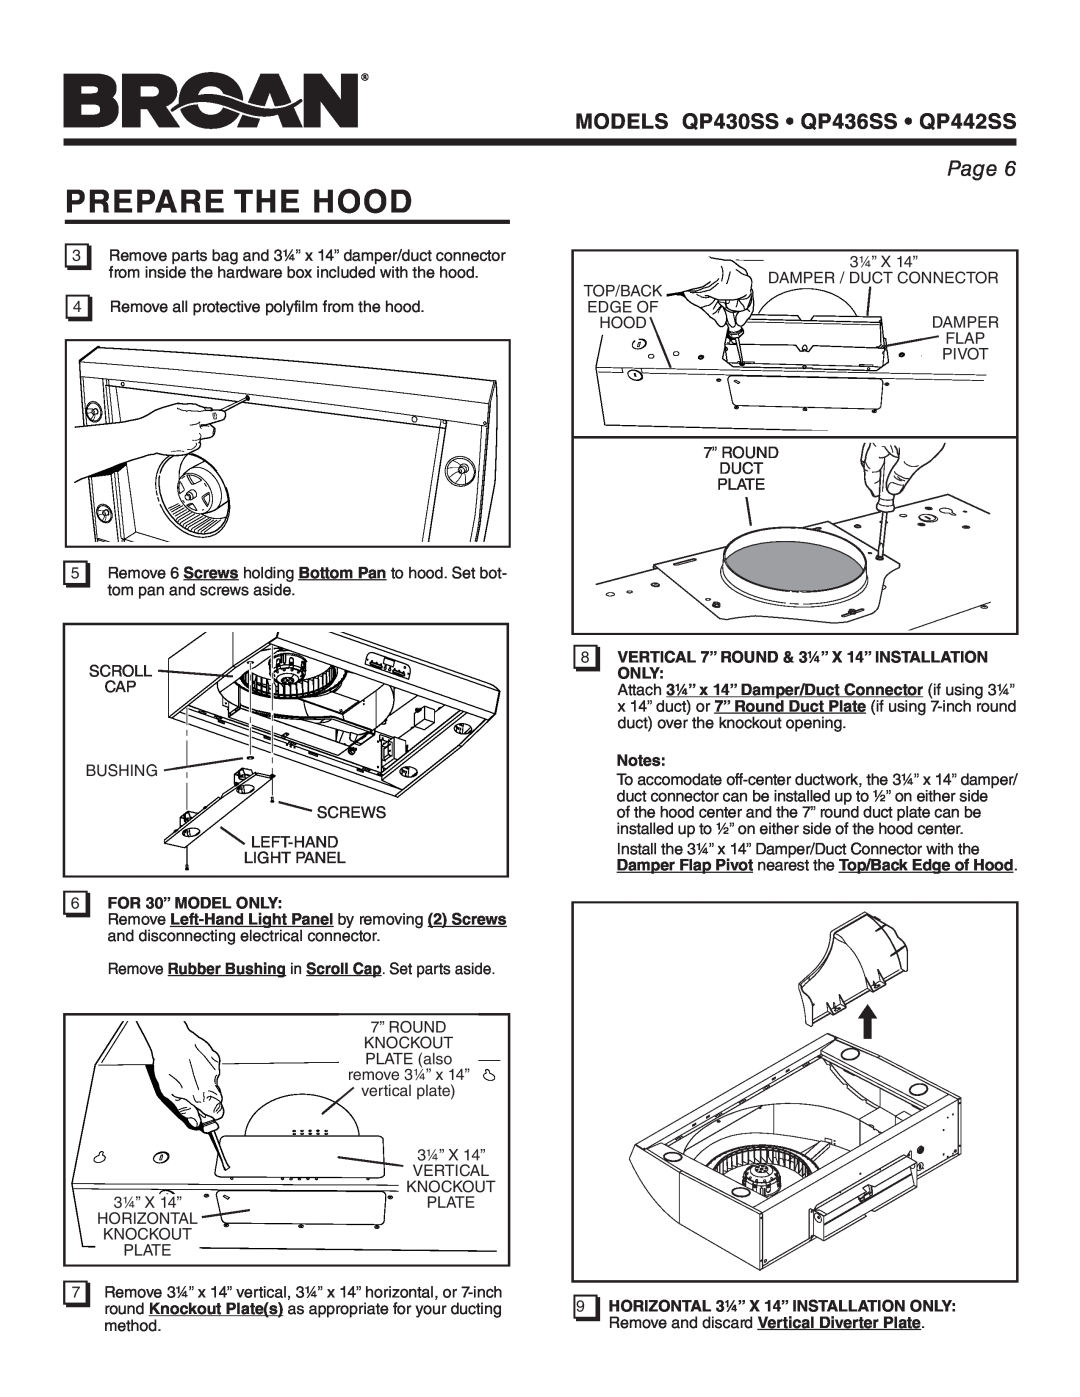 Broan QP430SS, QP436SS Prepare The Hood, FOR 30” MODEL ONLY, VERTICAL 7” ROUND & 3¼” X 14” INSTALLATION ONLY, Notes, Page 